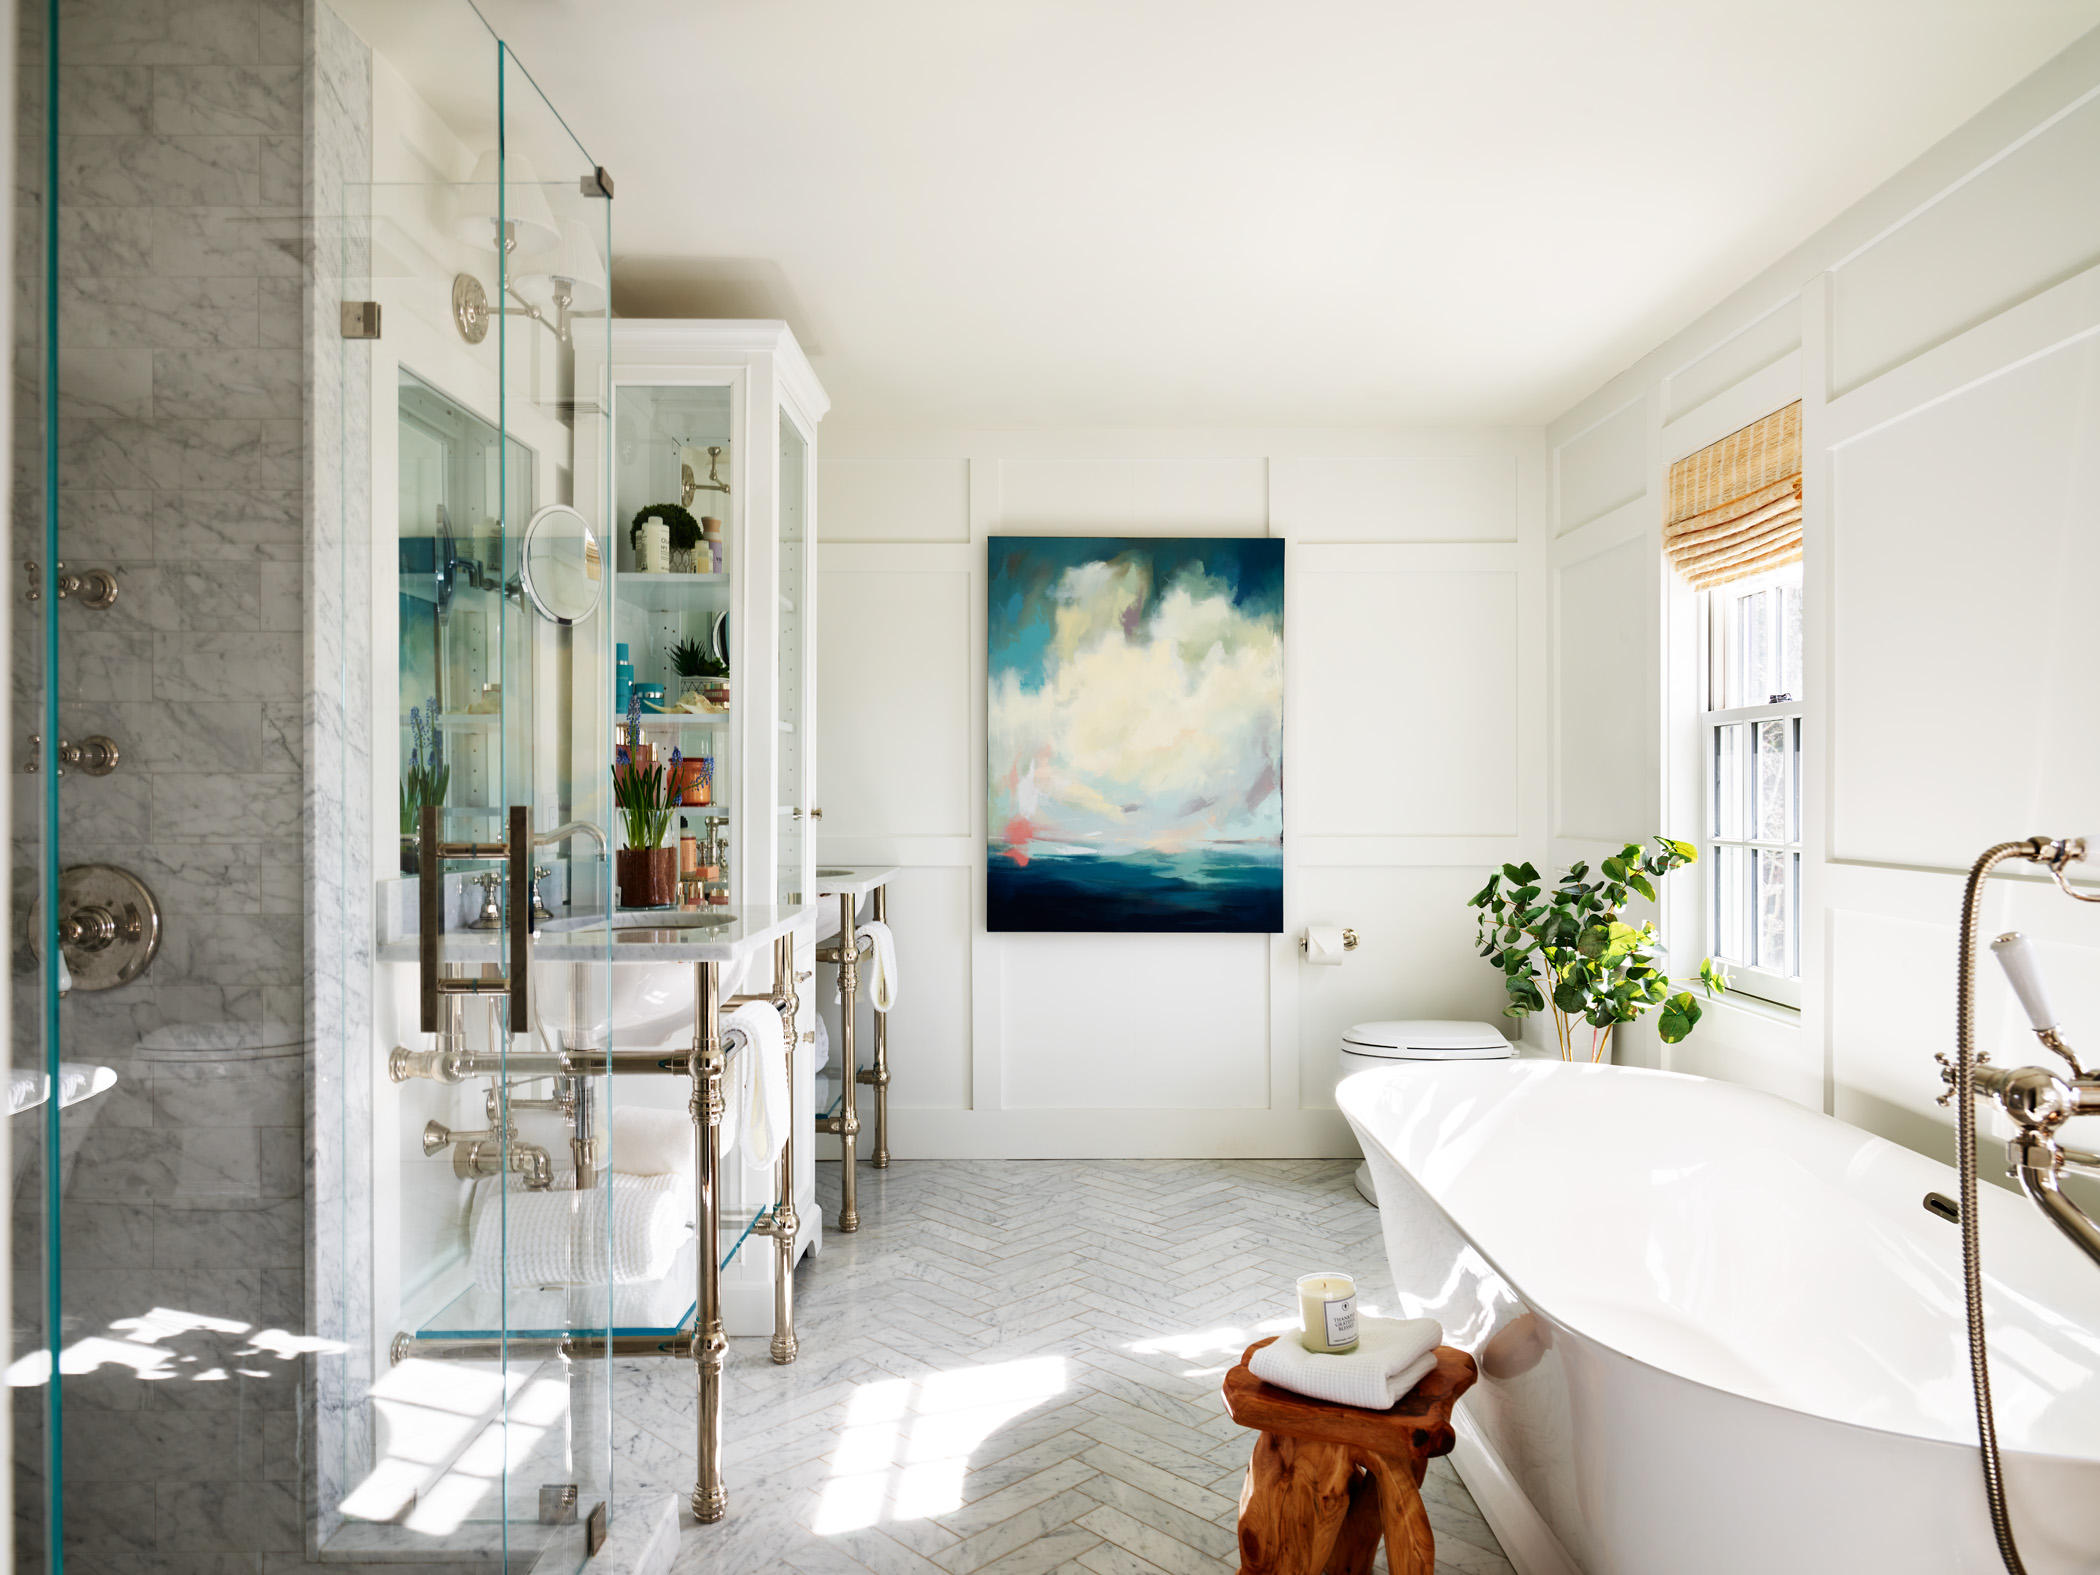 Timeless Carrara Marble Bathroom with British fixtures, soaking tub and Walk-in Shower